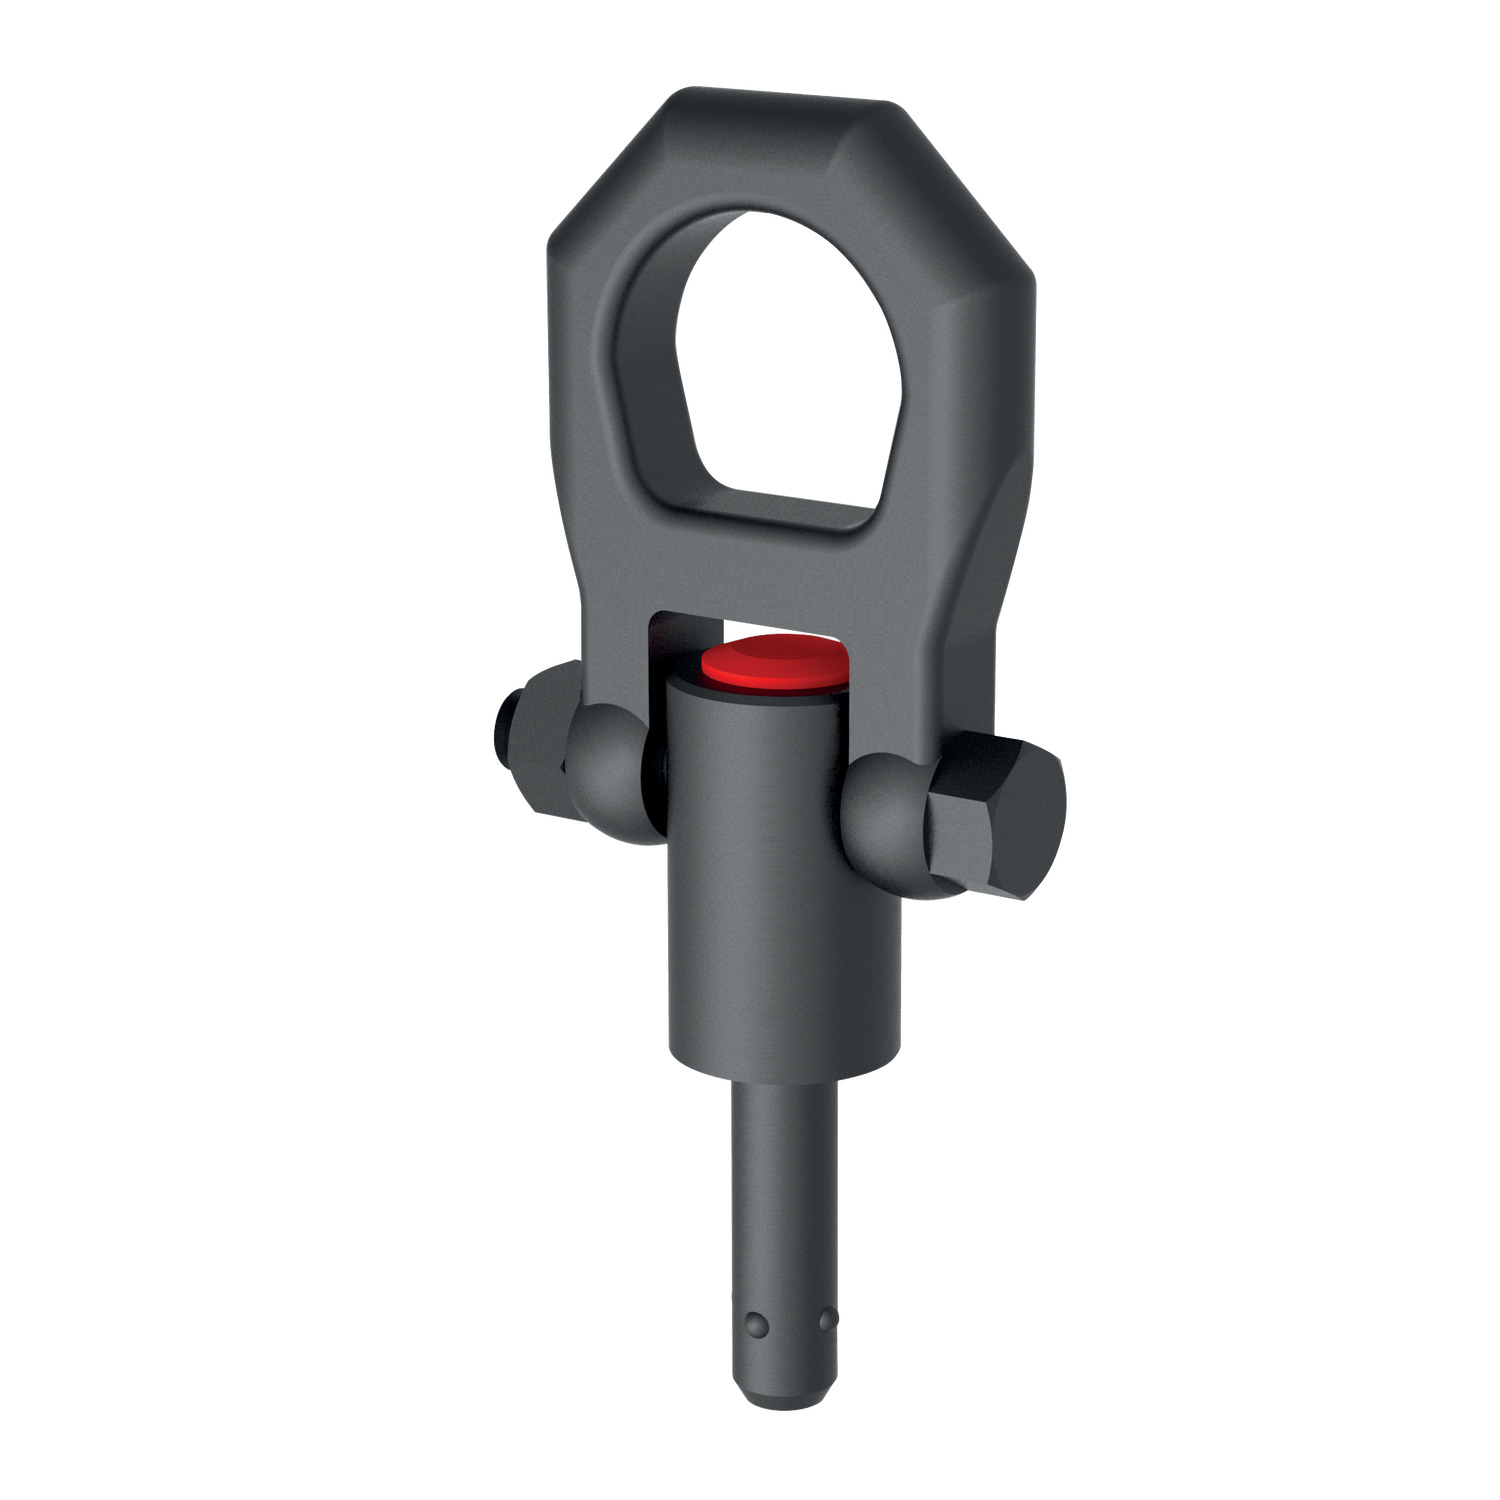 Quick Lift Pins - Self Locking Self locking quick lift pin made from heat treated steel. Safety shackle prevents accidental locking/unlocking. For lift forces of up to 48Kn. CE rated. 